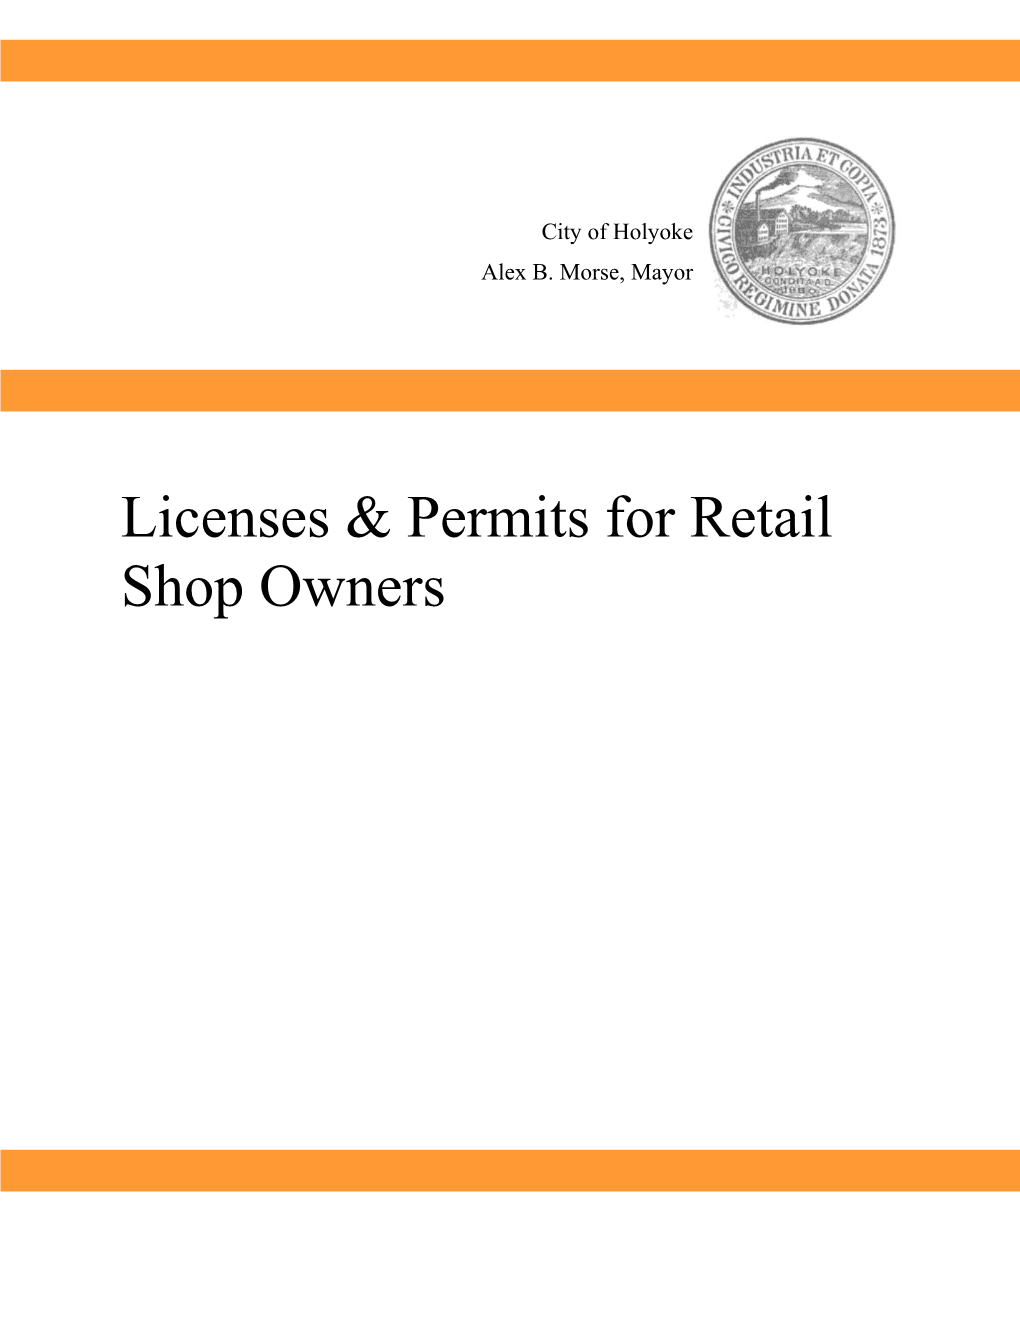 Licenses & Permits for Retail Shop Owners